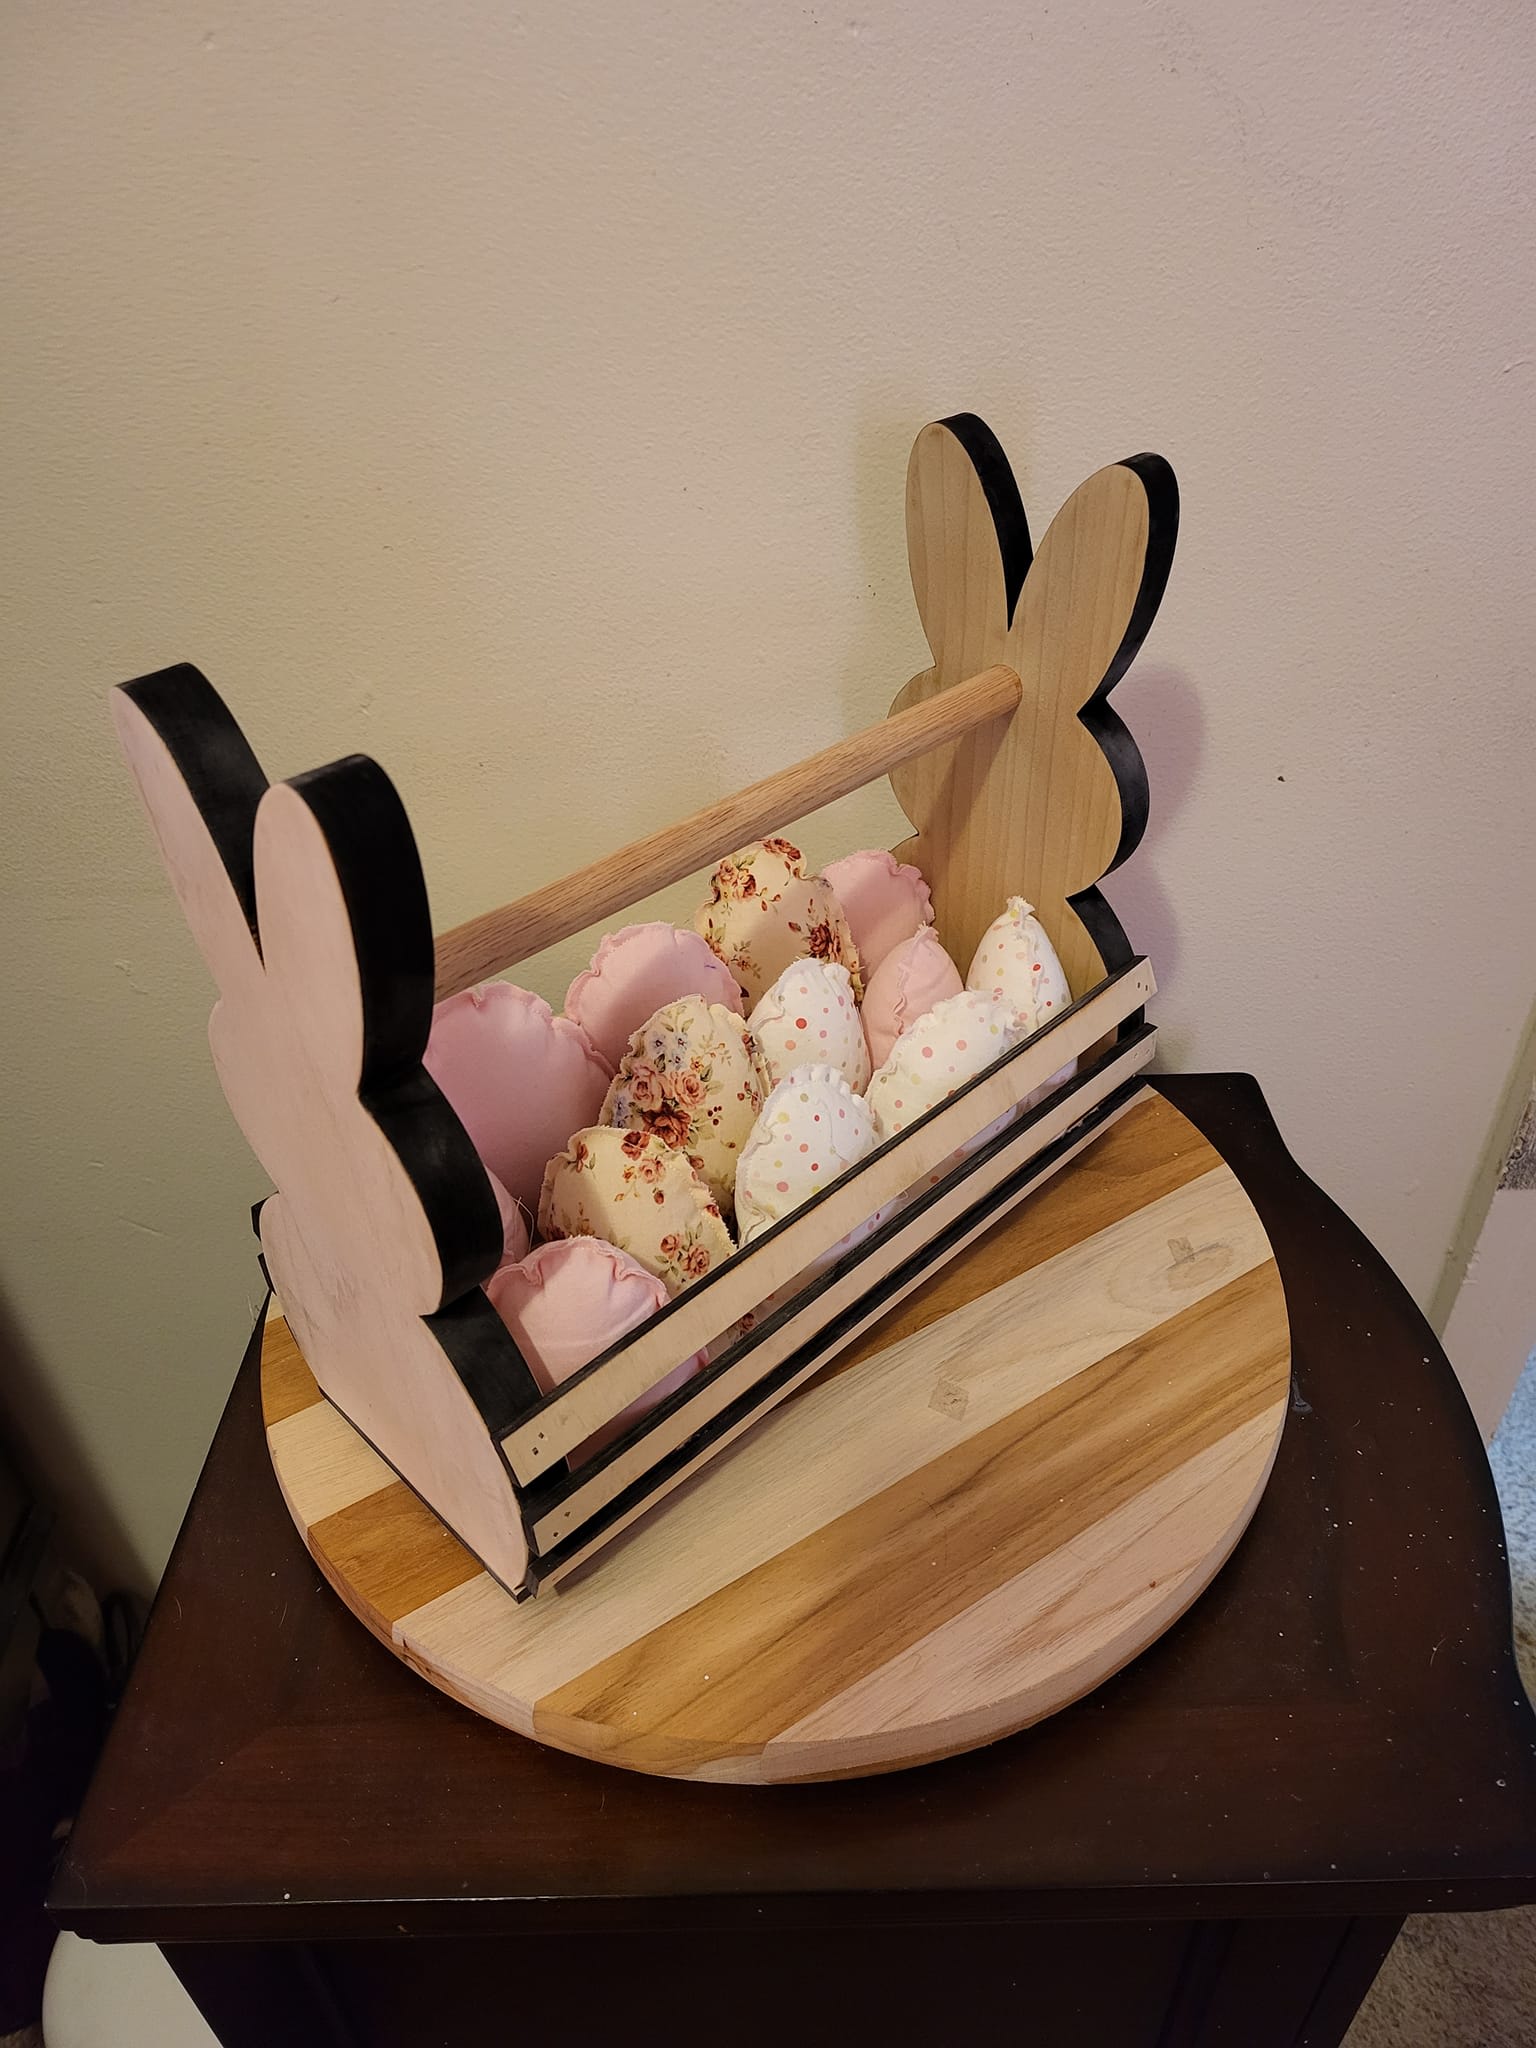 Wooden Easter Basket, Personalized Name, Bunny Baskets, Fabric Stuffed Eggs, DIY